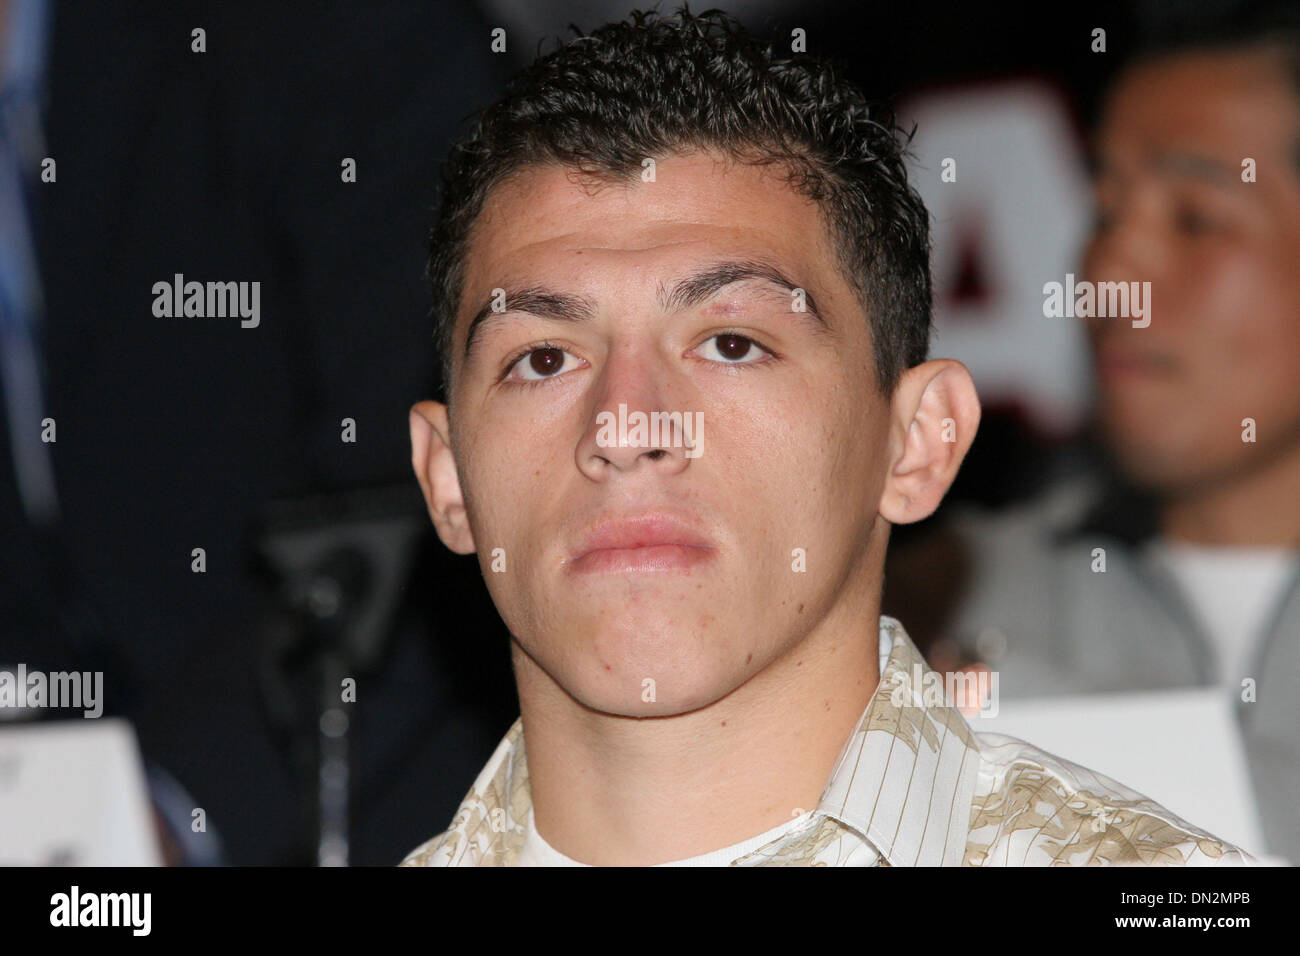 Sep 14, 2006; Las Vegas, NV, USA; BOXING: MARCO JORGE PAEZ Jr, son of famous Mexican Fighter Jorge Paez 'the Clown Prince' at the MGM Grand Hotel and Casino during the Barrera vs Juarez ll press conference. Paez Jr is scheduled to fight Derrick Campos  on the undercard of  Barrera vs Juarez on  Saturday 09-16-06 at the MGM Grand Garden Arena & will be televised on Pay Per View. Man Stock Photo